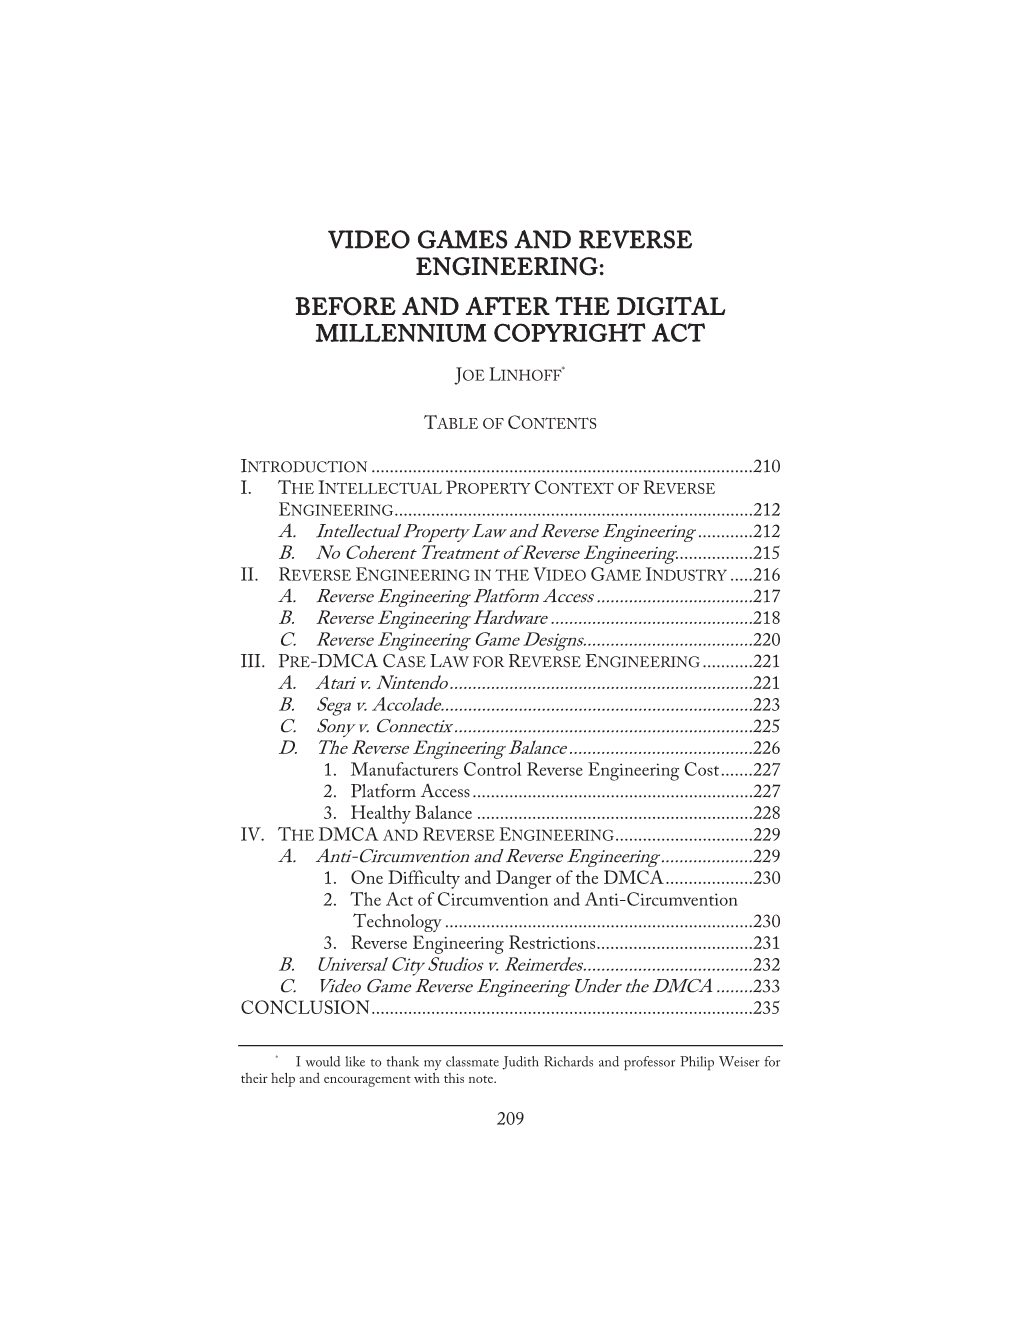 Video Games and Reverse Engineering: Before and After the Digital Millennium Copyright Act